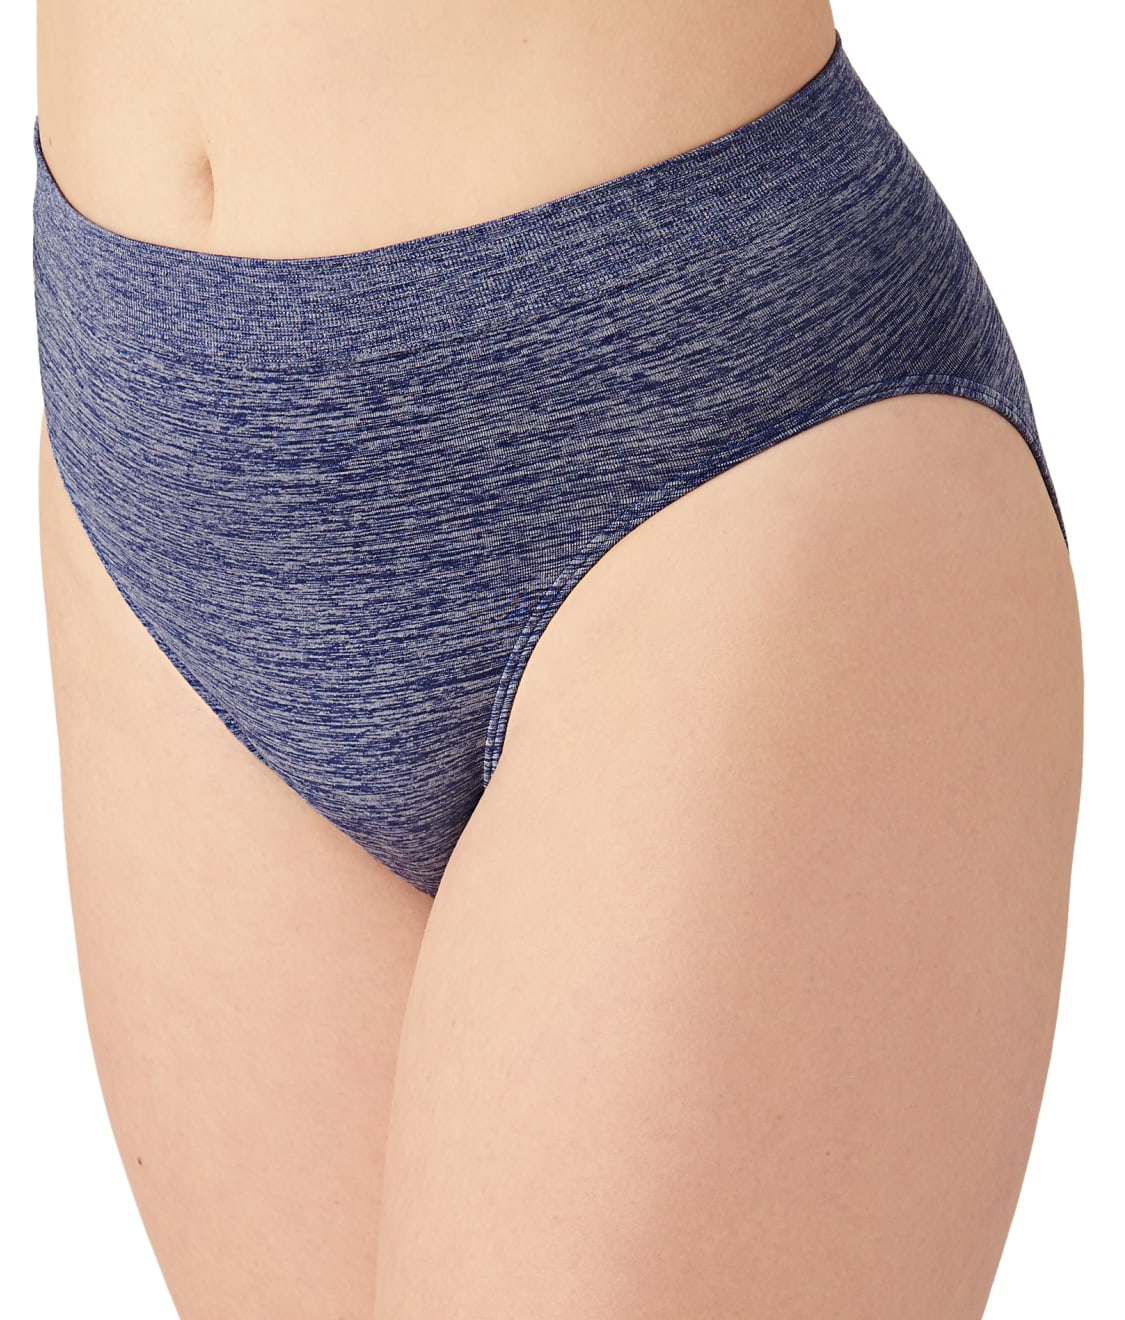 Wacoal Women's Simply Smoothing Shaping Brief Panty Underwear, Roebuck,  XX-Large